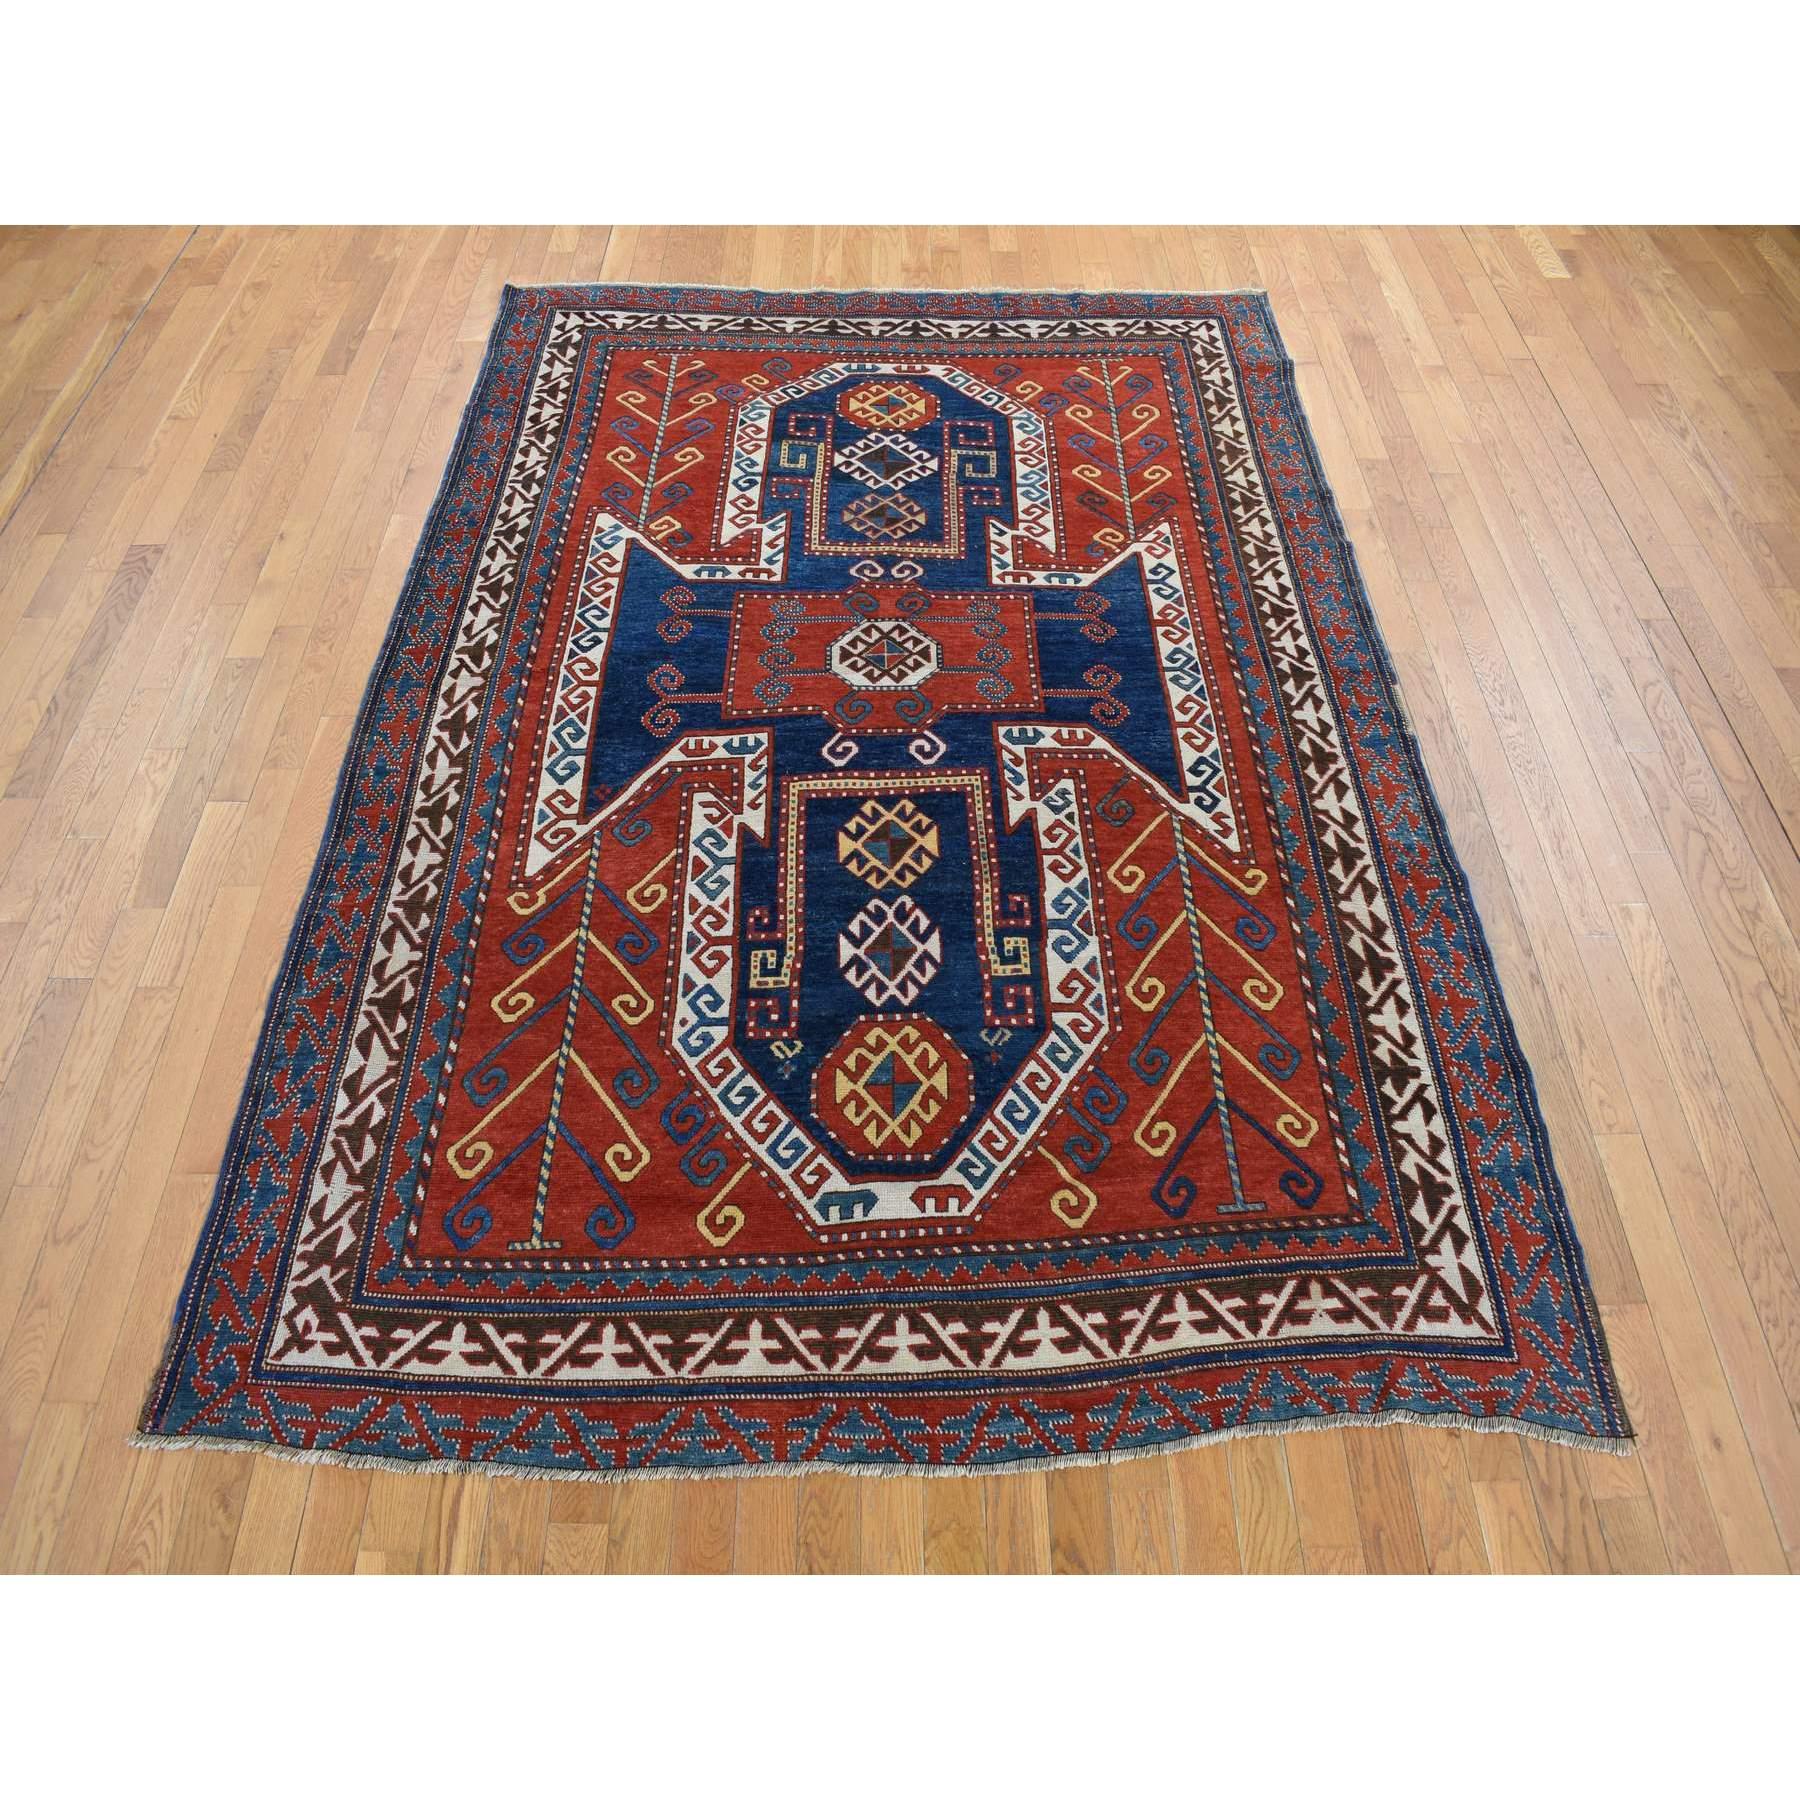 This fabulous Hand-Knotted carpet has been created and designed for extra strength and durability. This rug has been handcrafted for weeks in the traditional method that is used to make
Exact Rug Size in Feet and Inches : 6'10